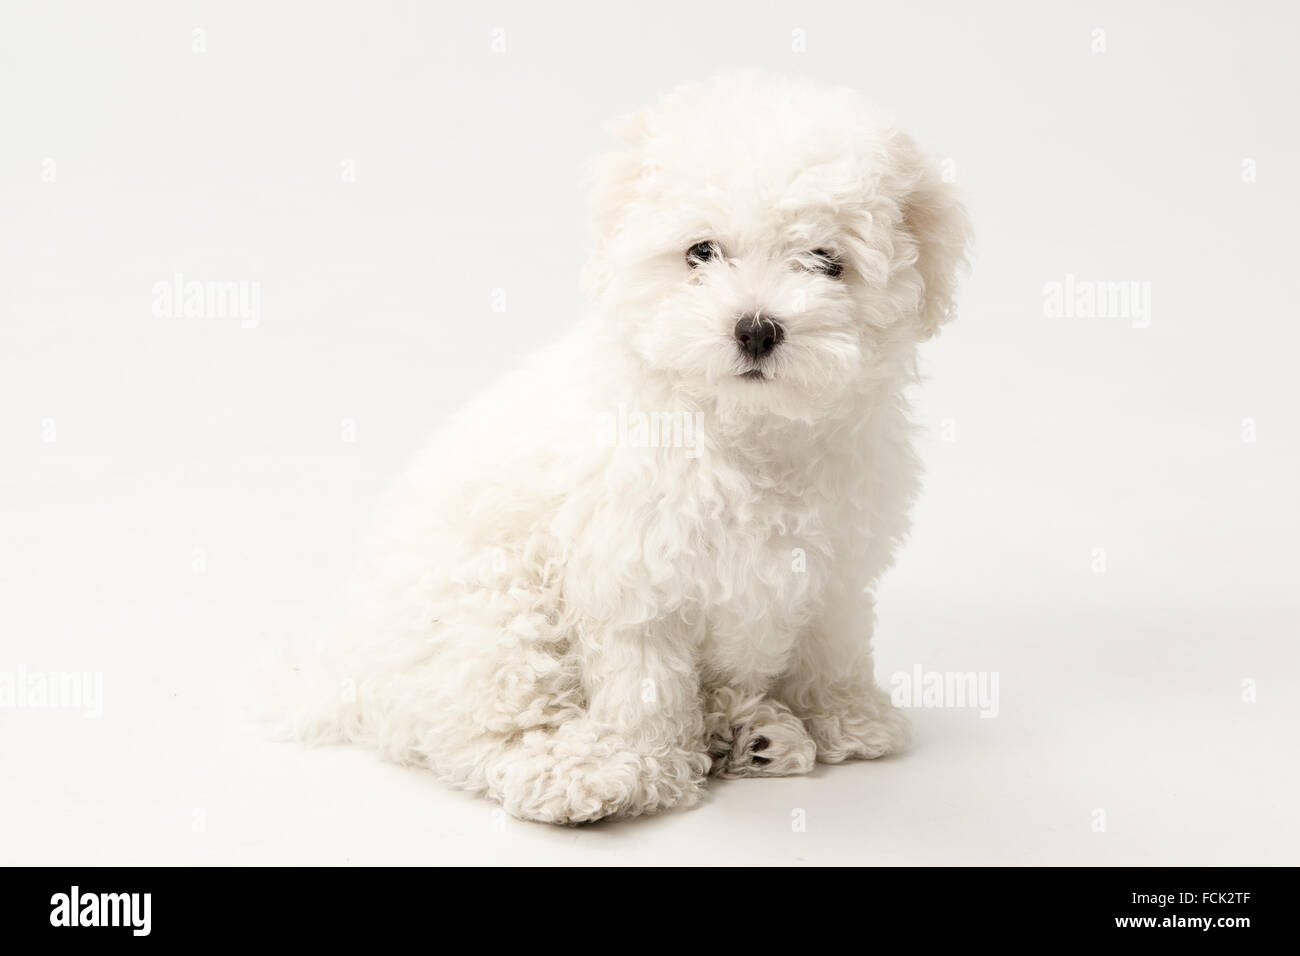 seated bichon frise puppy dog on a white background Stock Photo